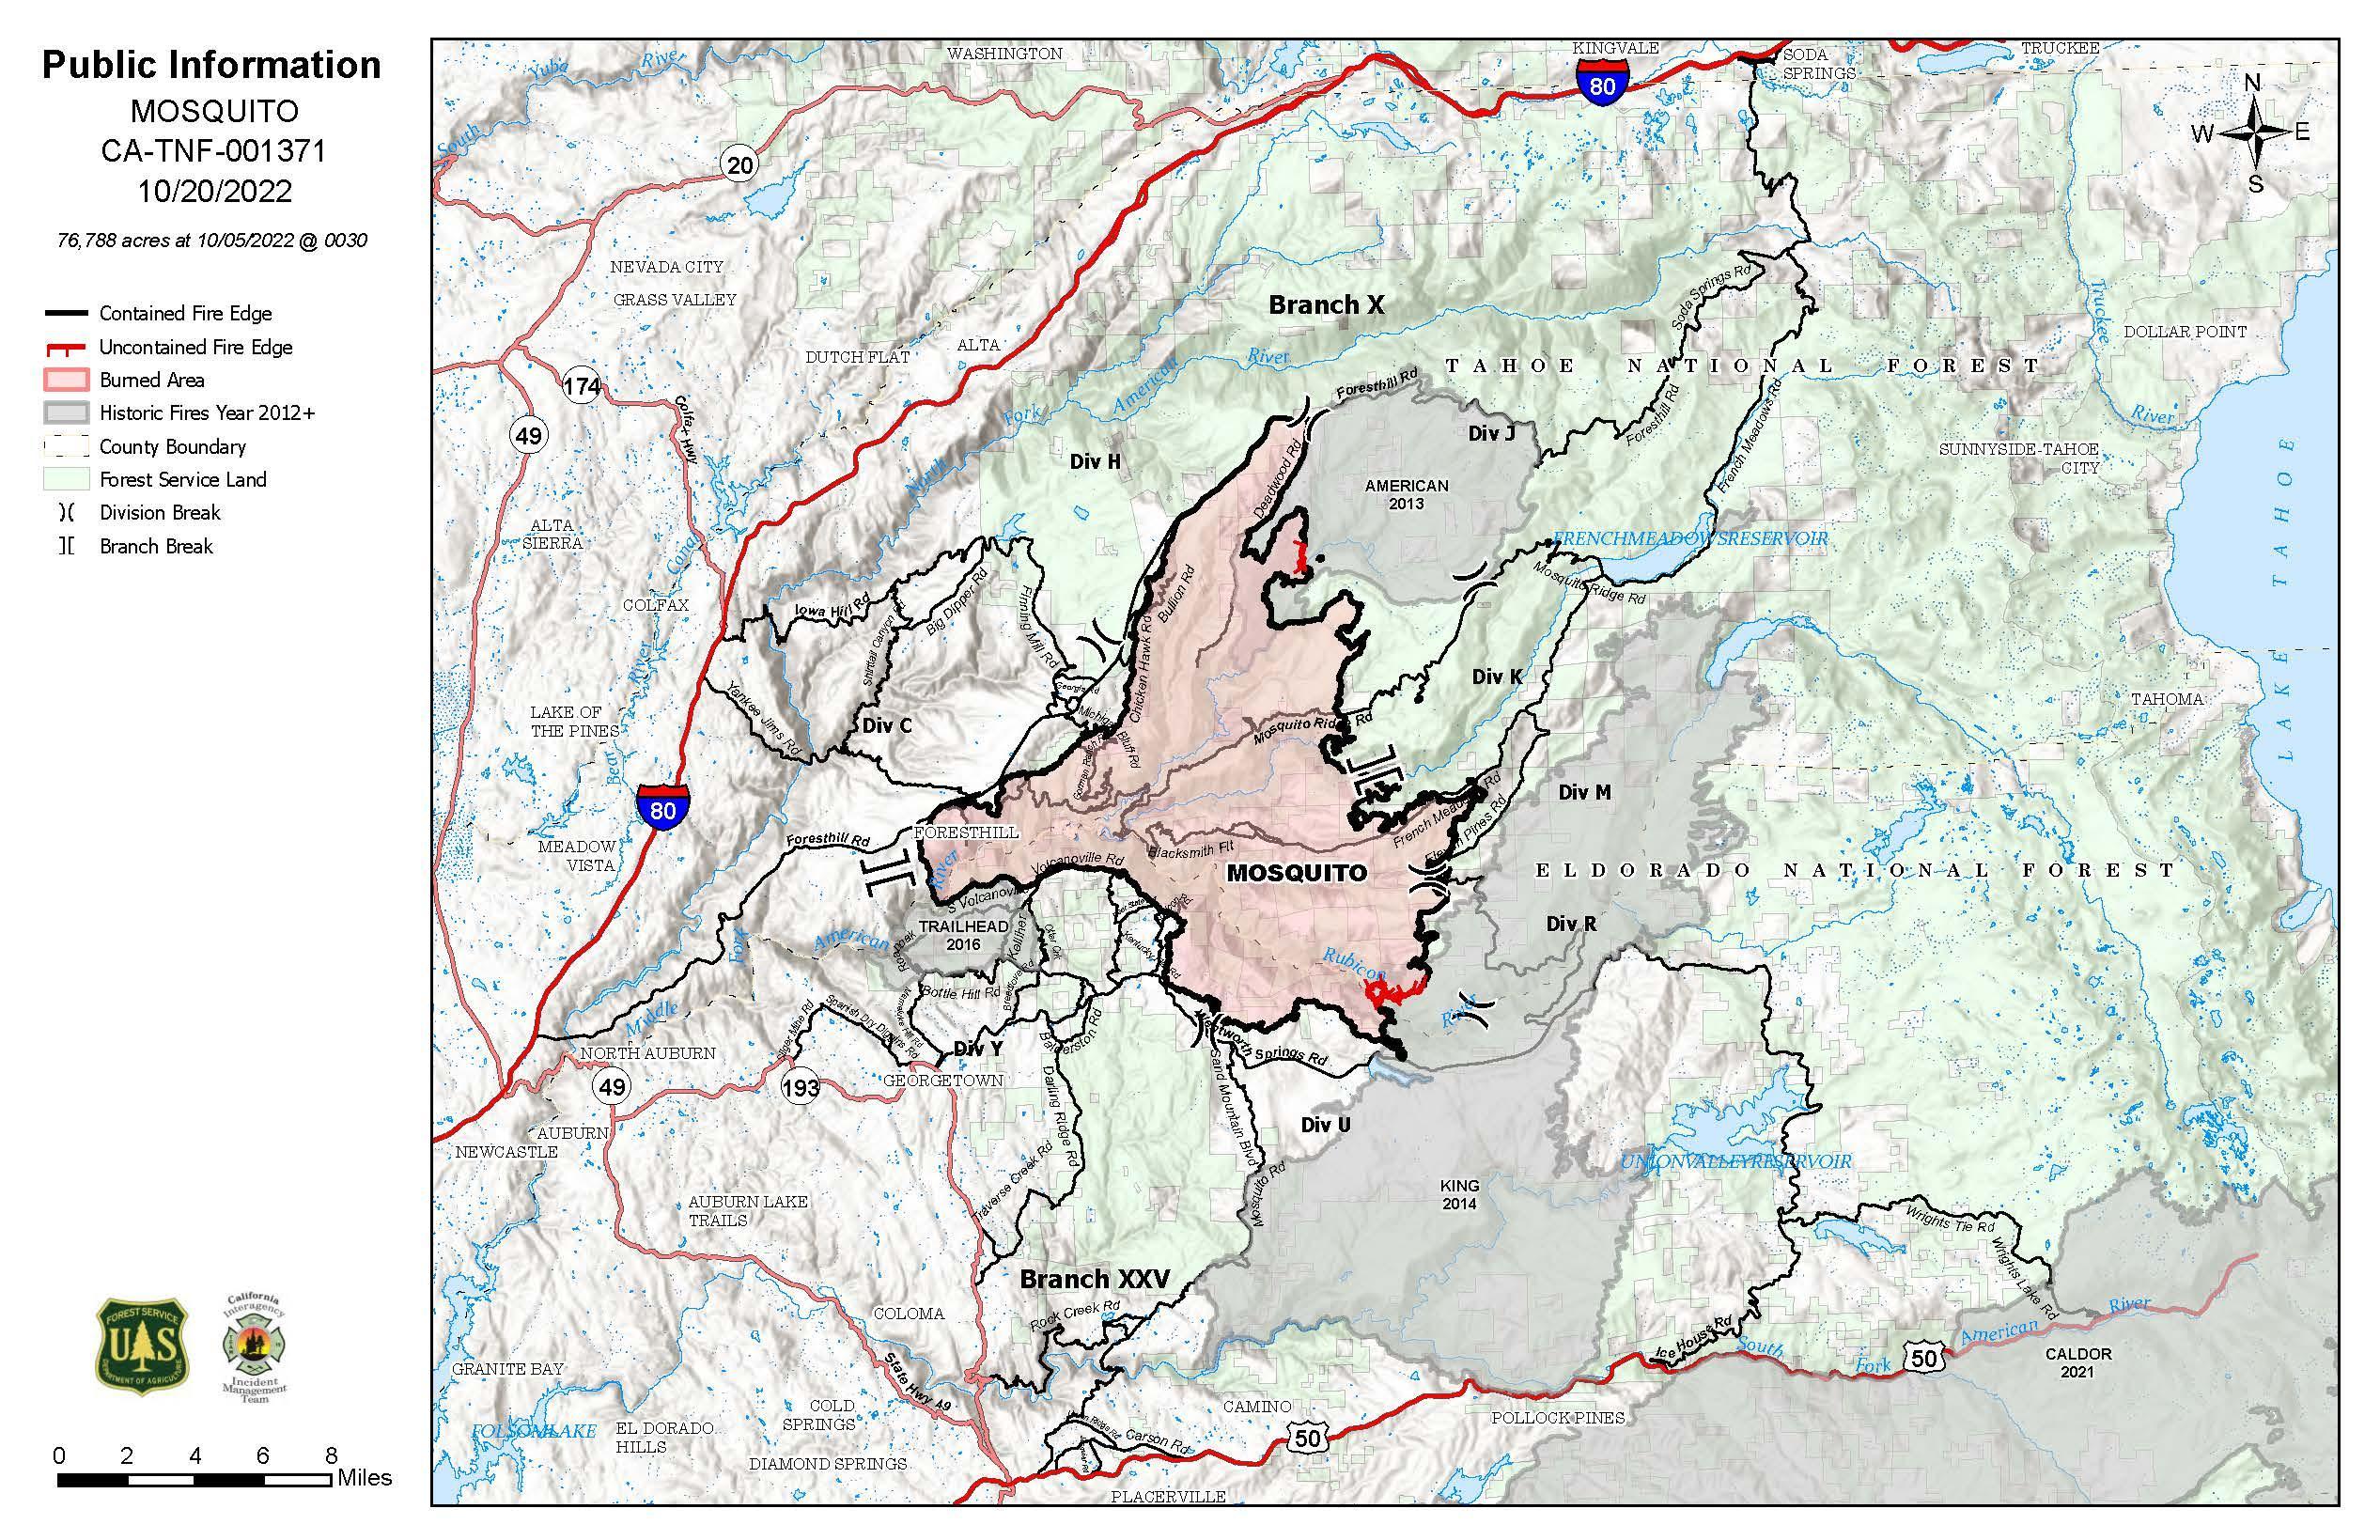 Mosquito Fire Public Information Map (10-20-2022) 